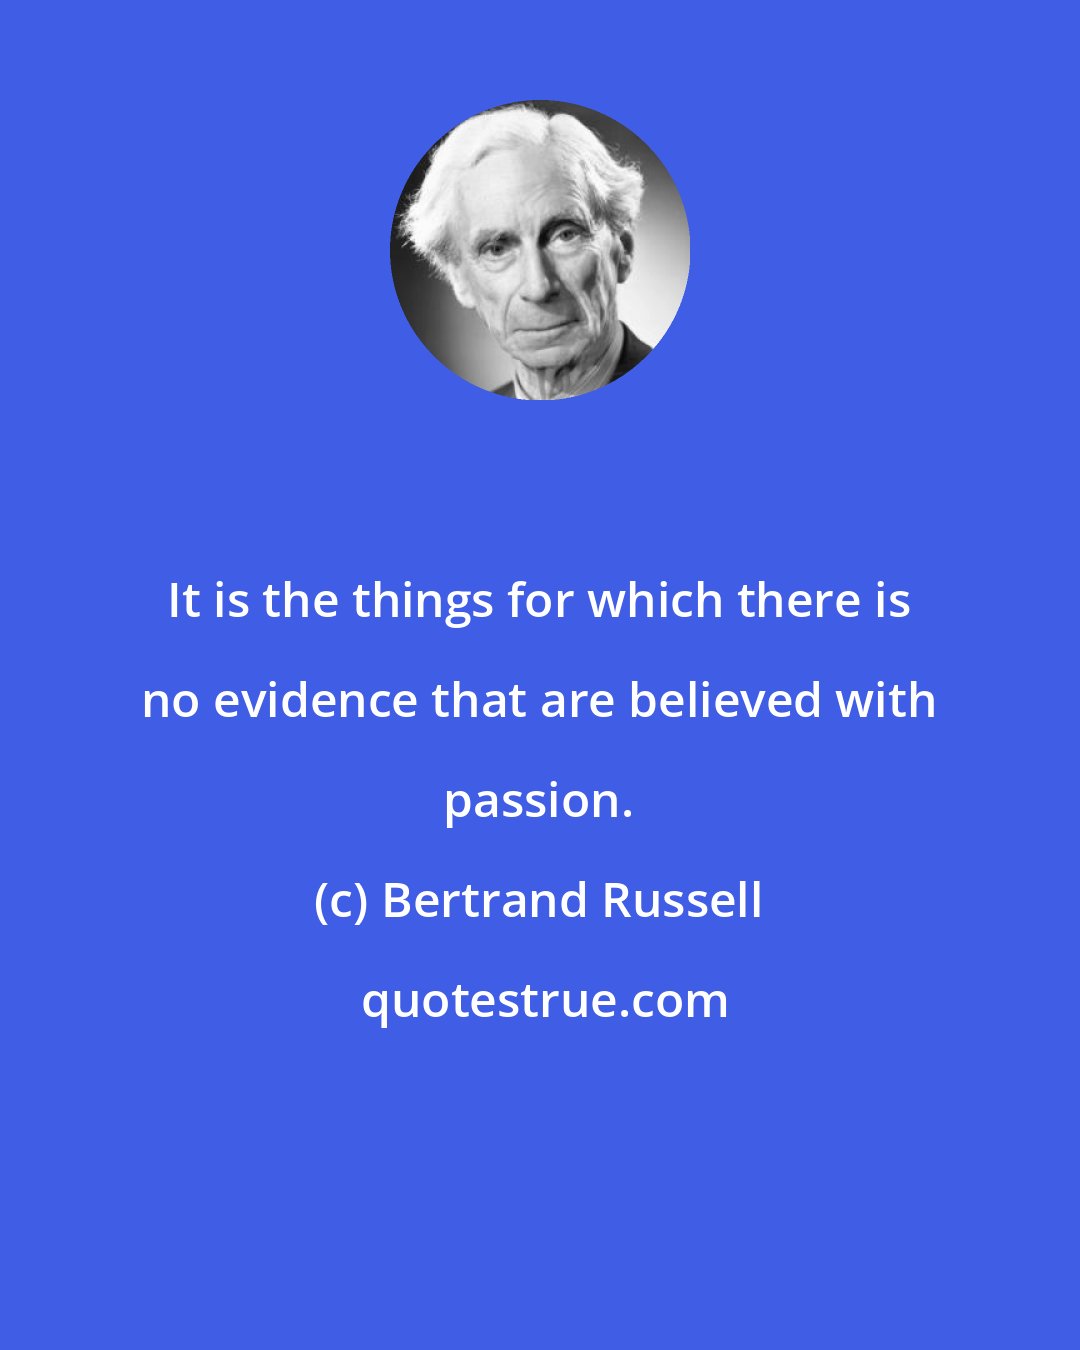 Bertrand Russell: It is the things for which there is no evidence that are believed with passion.